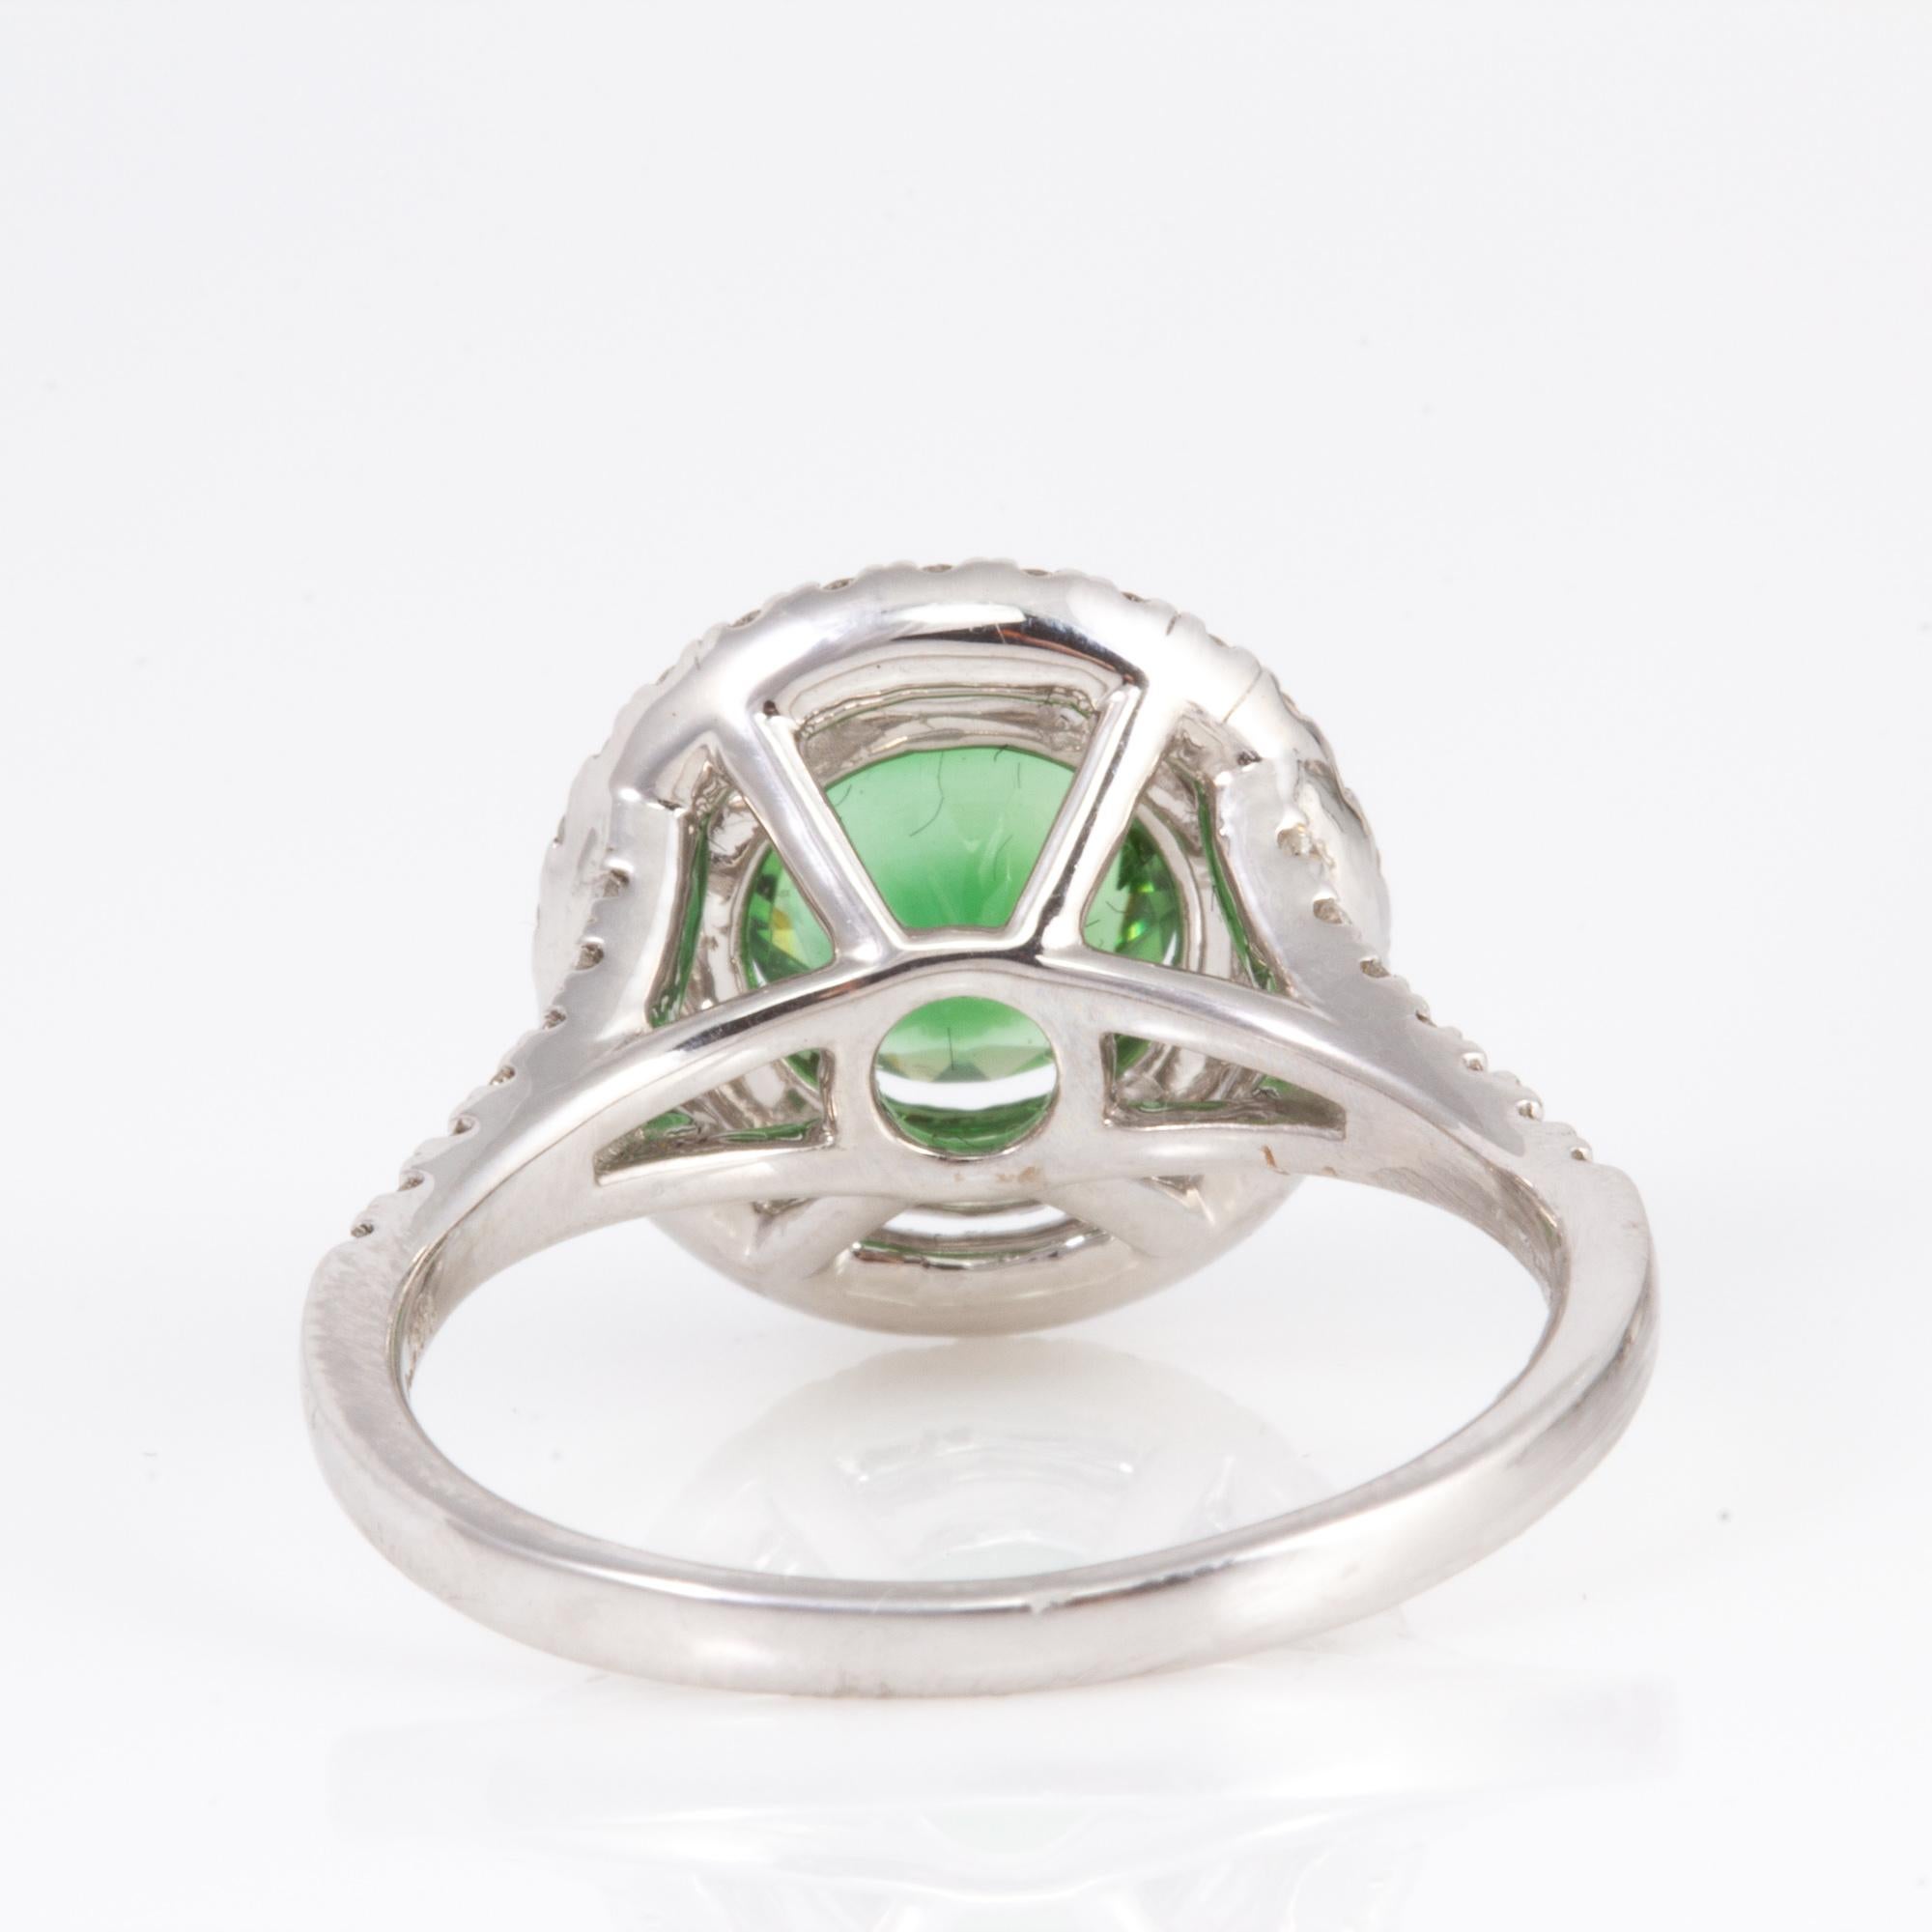 Exceptionally Well Cut 1.26 Carat Chrome Tourmaline and Diamond Ring 1